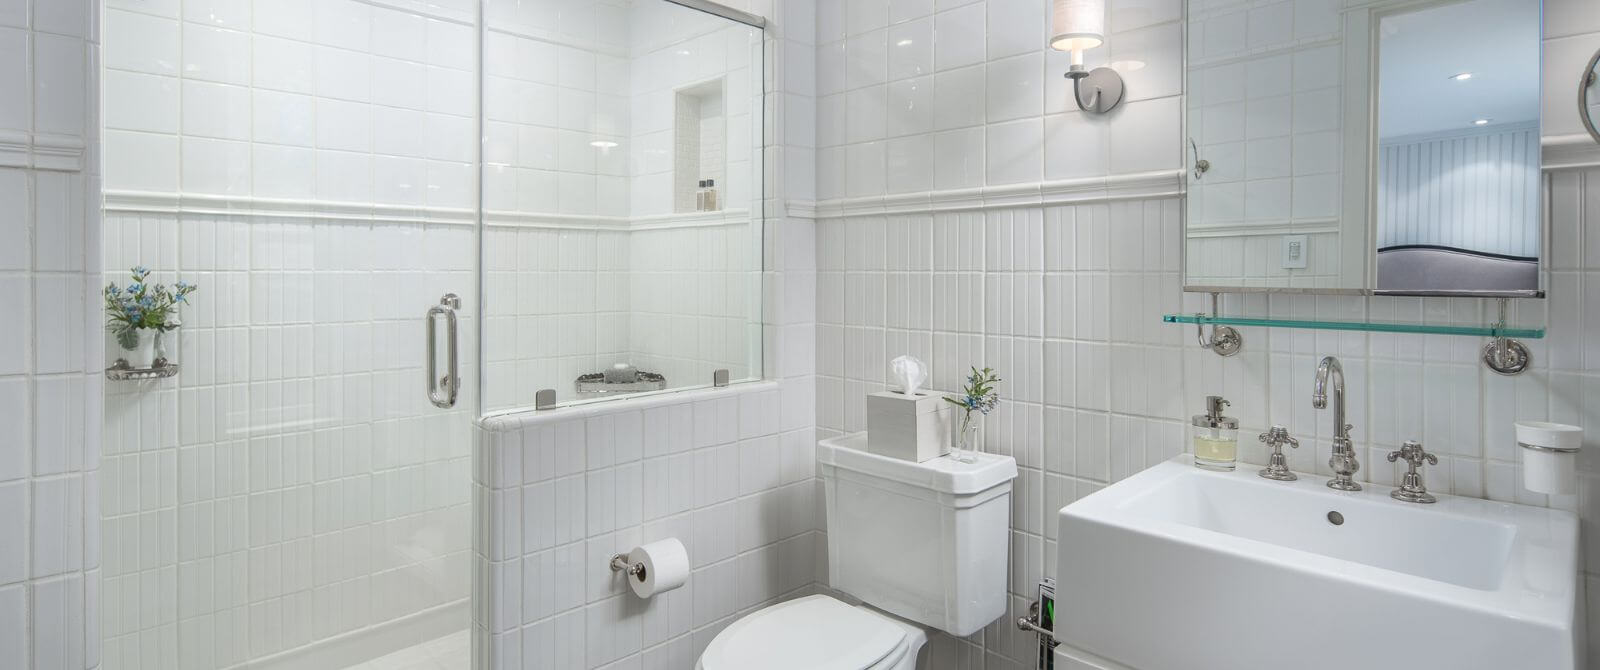 Elegant white bathroom with square sink, mirror, toilet and walk in shower with glass doors